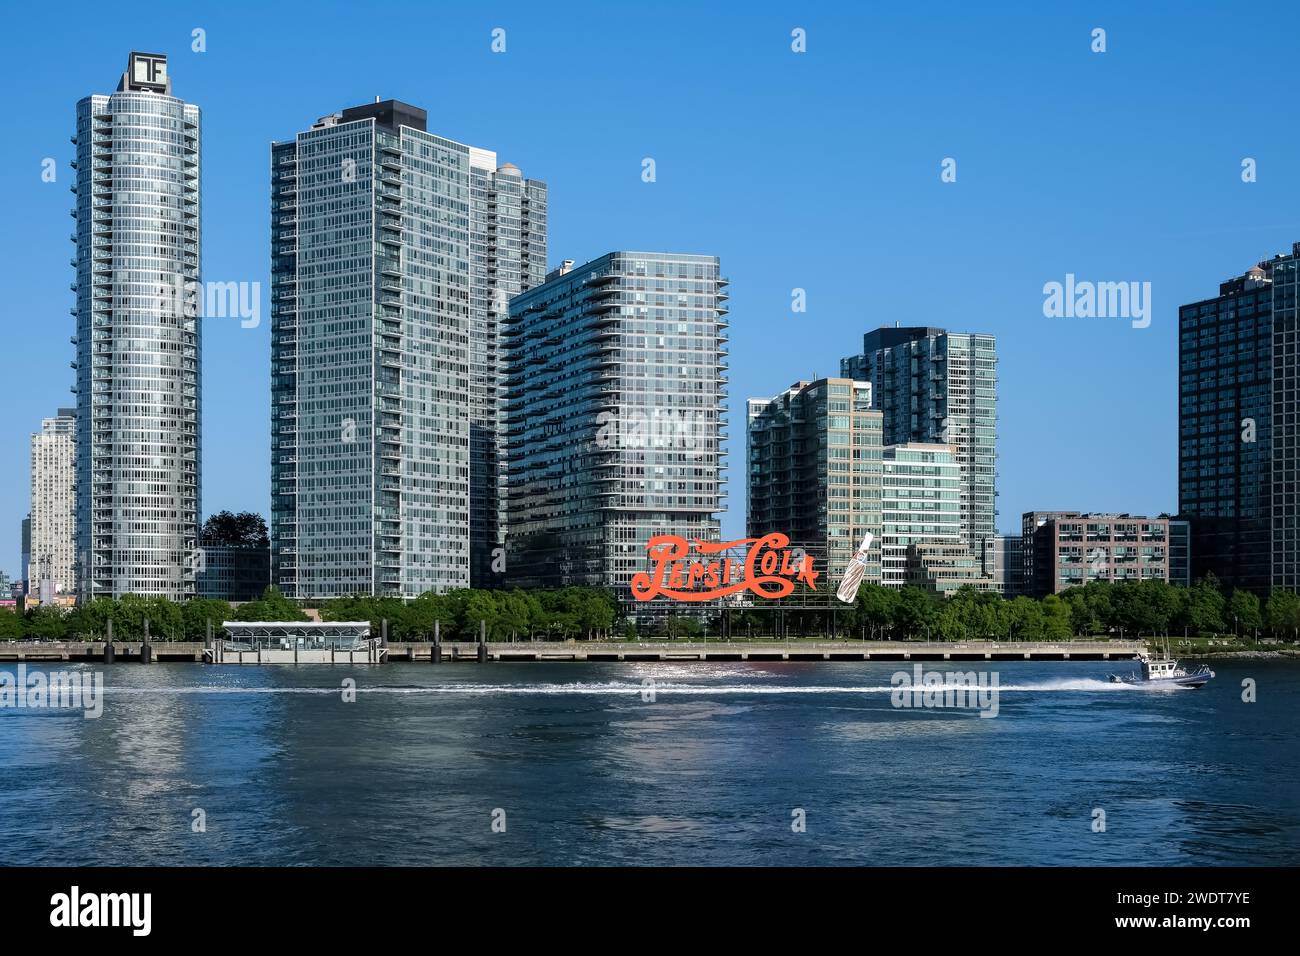 The Pepsi-Cola sign, built in 1940, a neon sign at Gantry Plaza State Park in the Long Island City neighborhood of Queens, New York City, USA Stock Photo